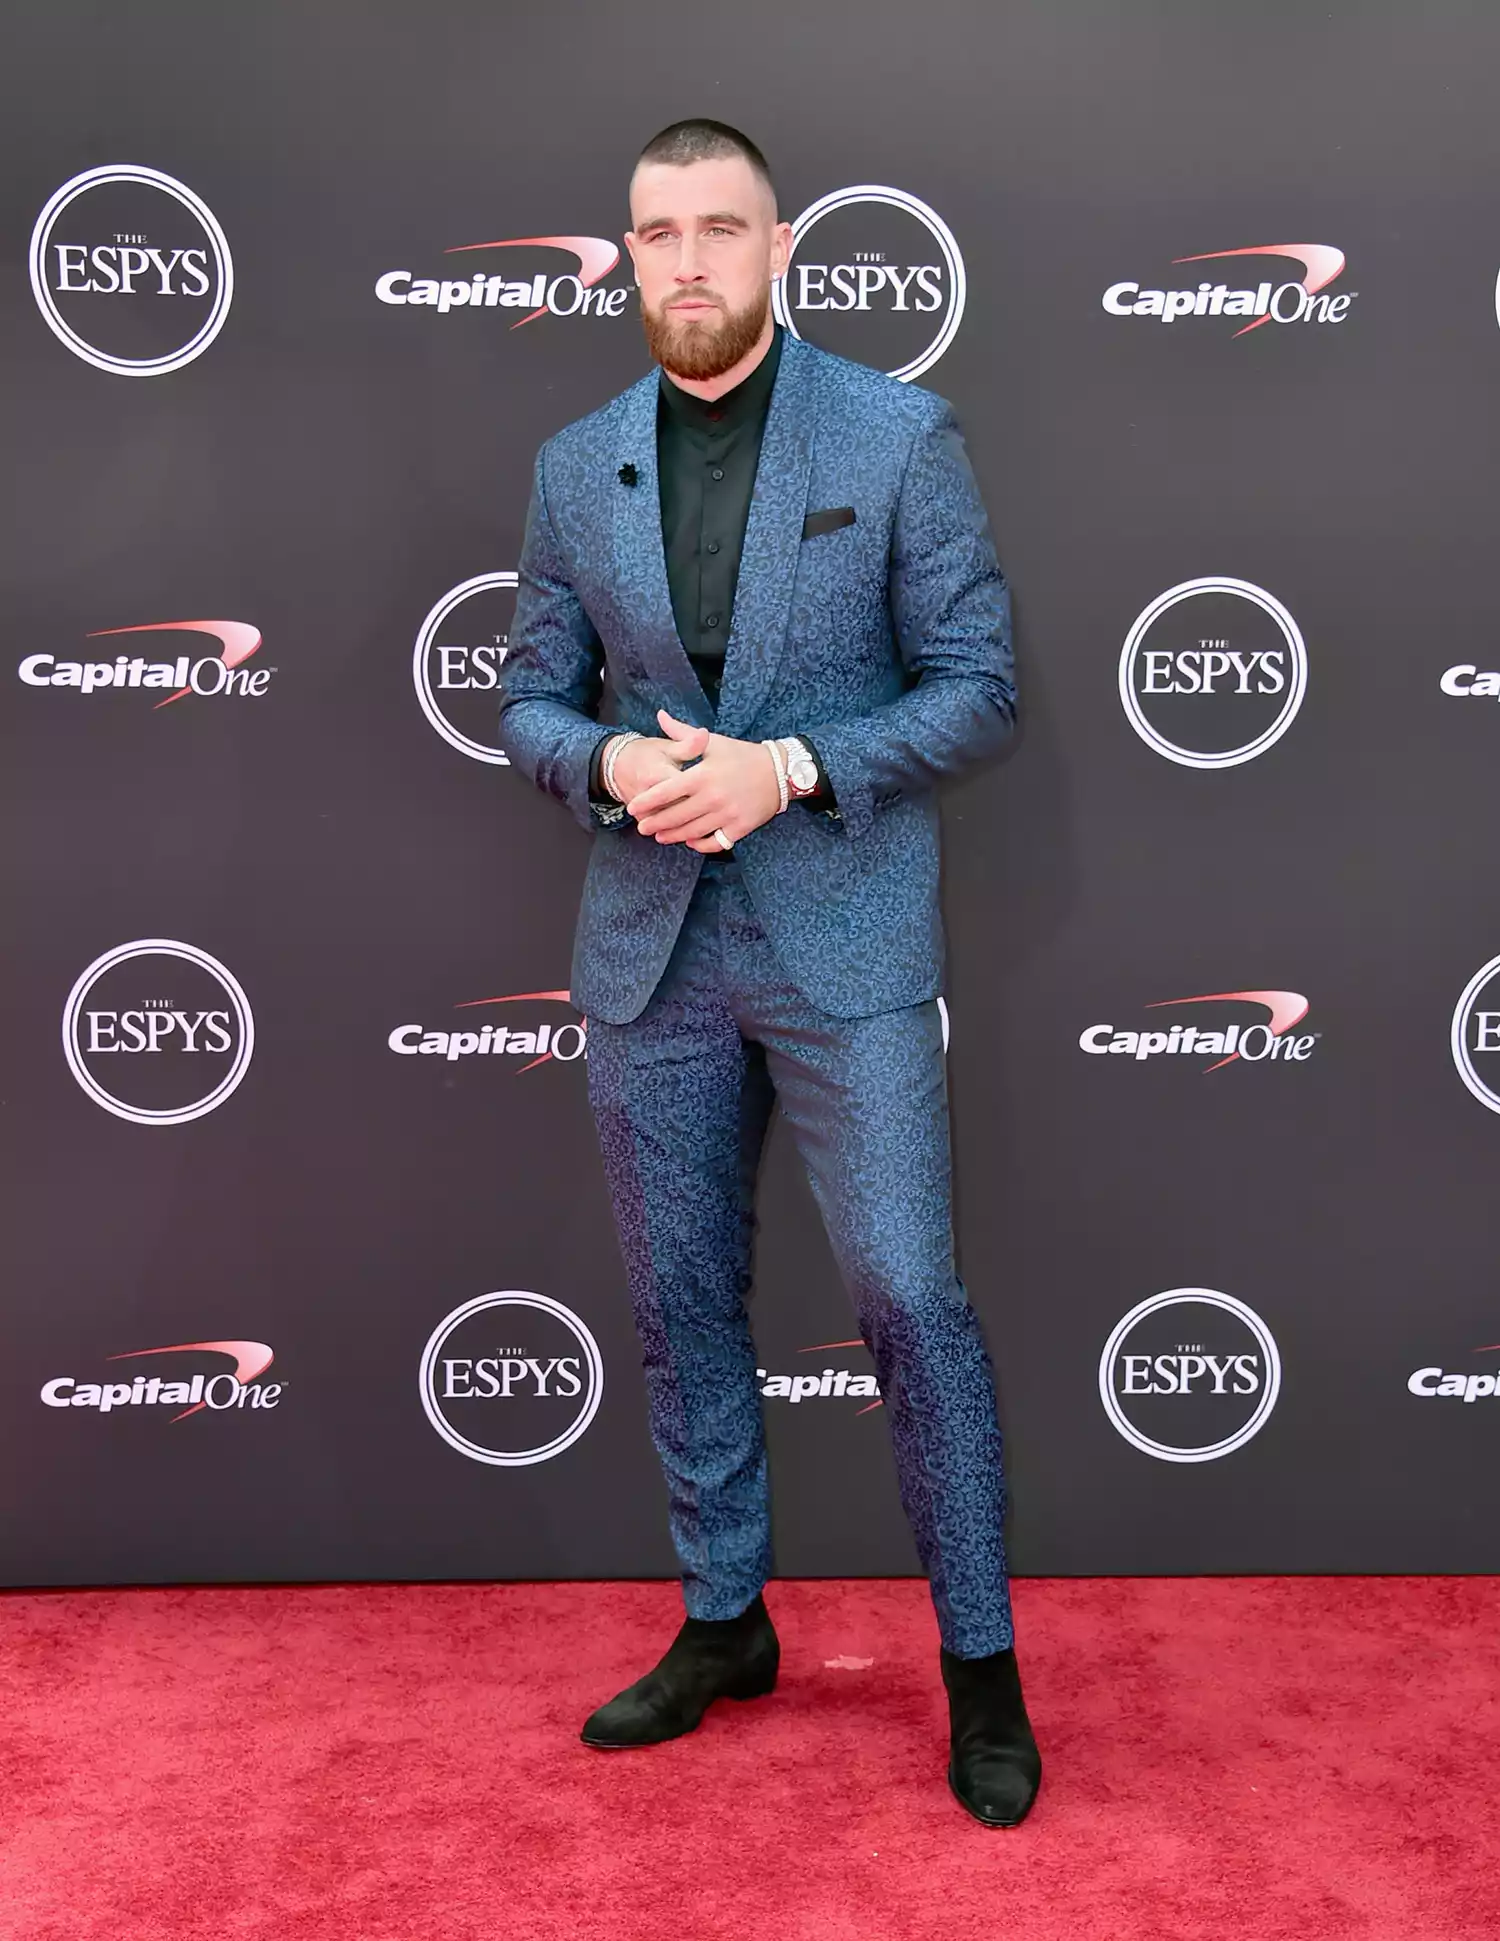 Travis Kelce attends The 2018 ESPYS at Microsoft Theater on July 18, 2018 in Los Angeles, California